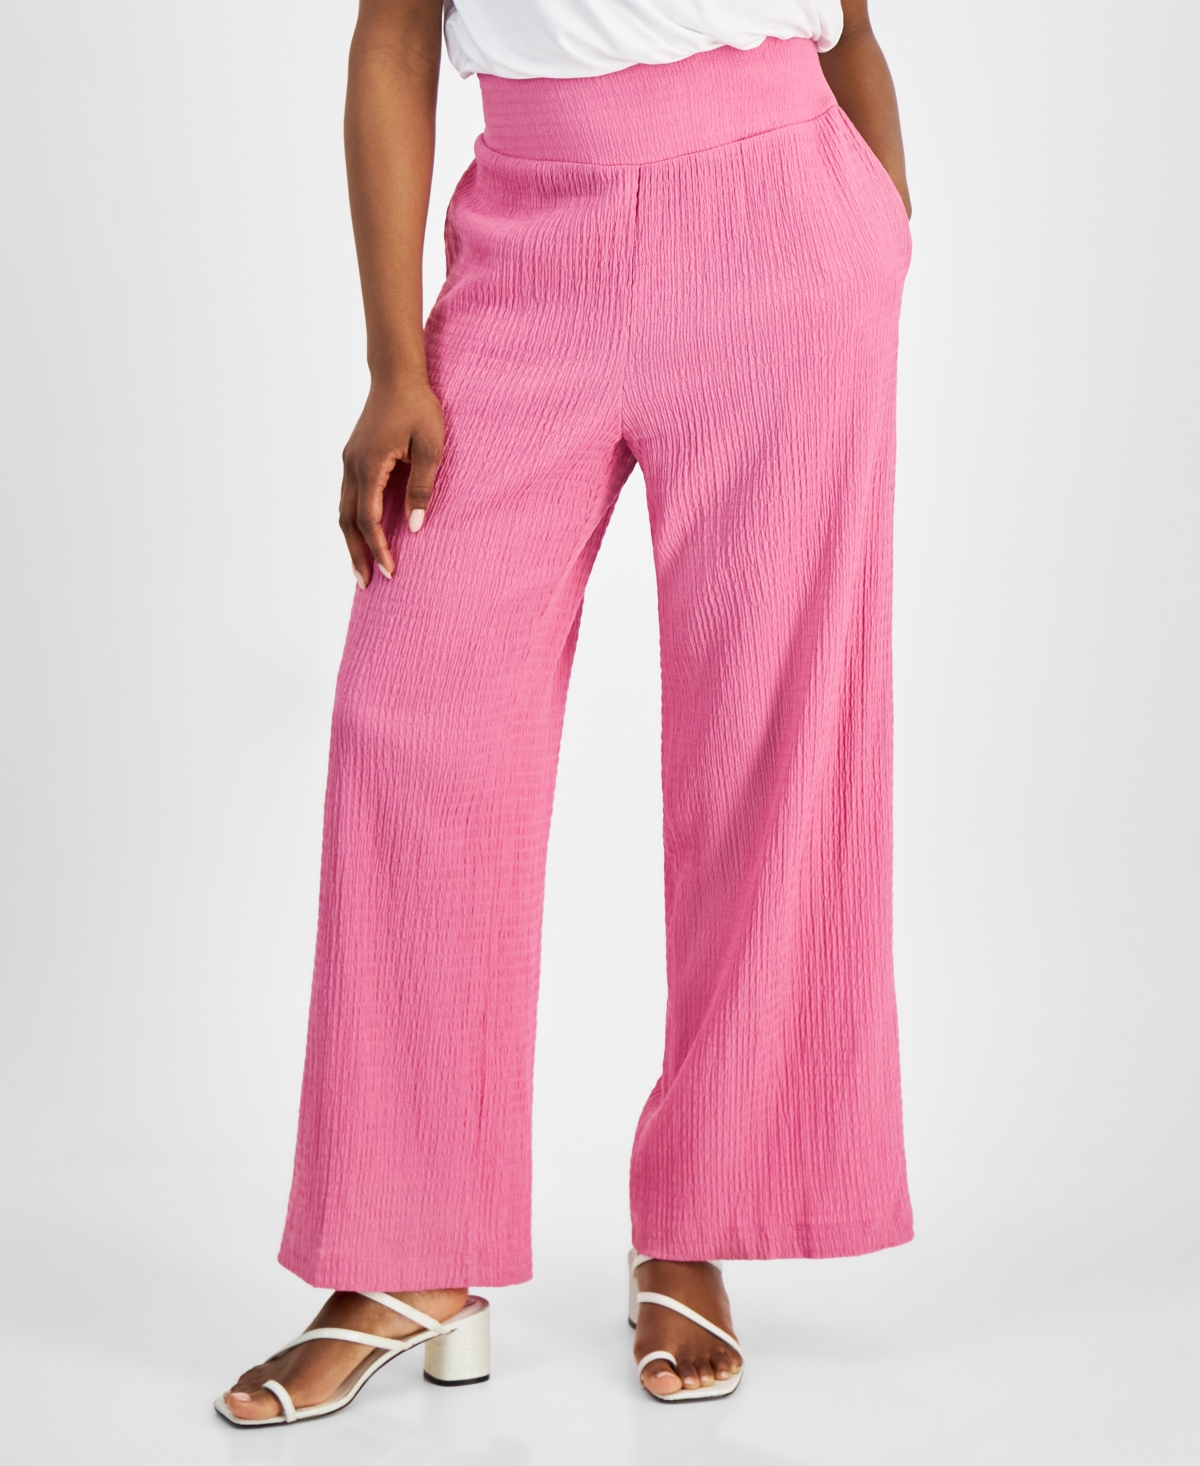 Bar Iii Petite High Rise Textured Wide Leg Pants, Created For Macy's In Wild Pink